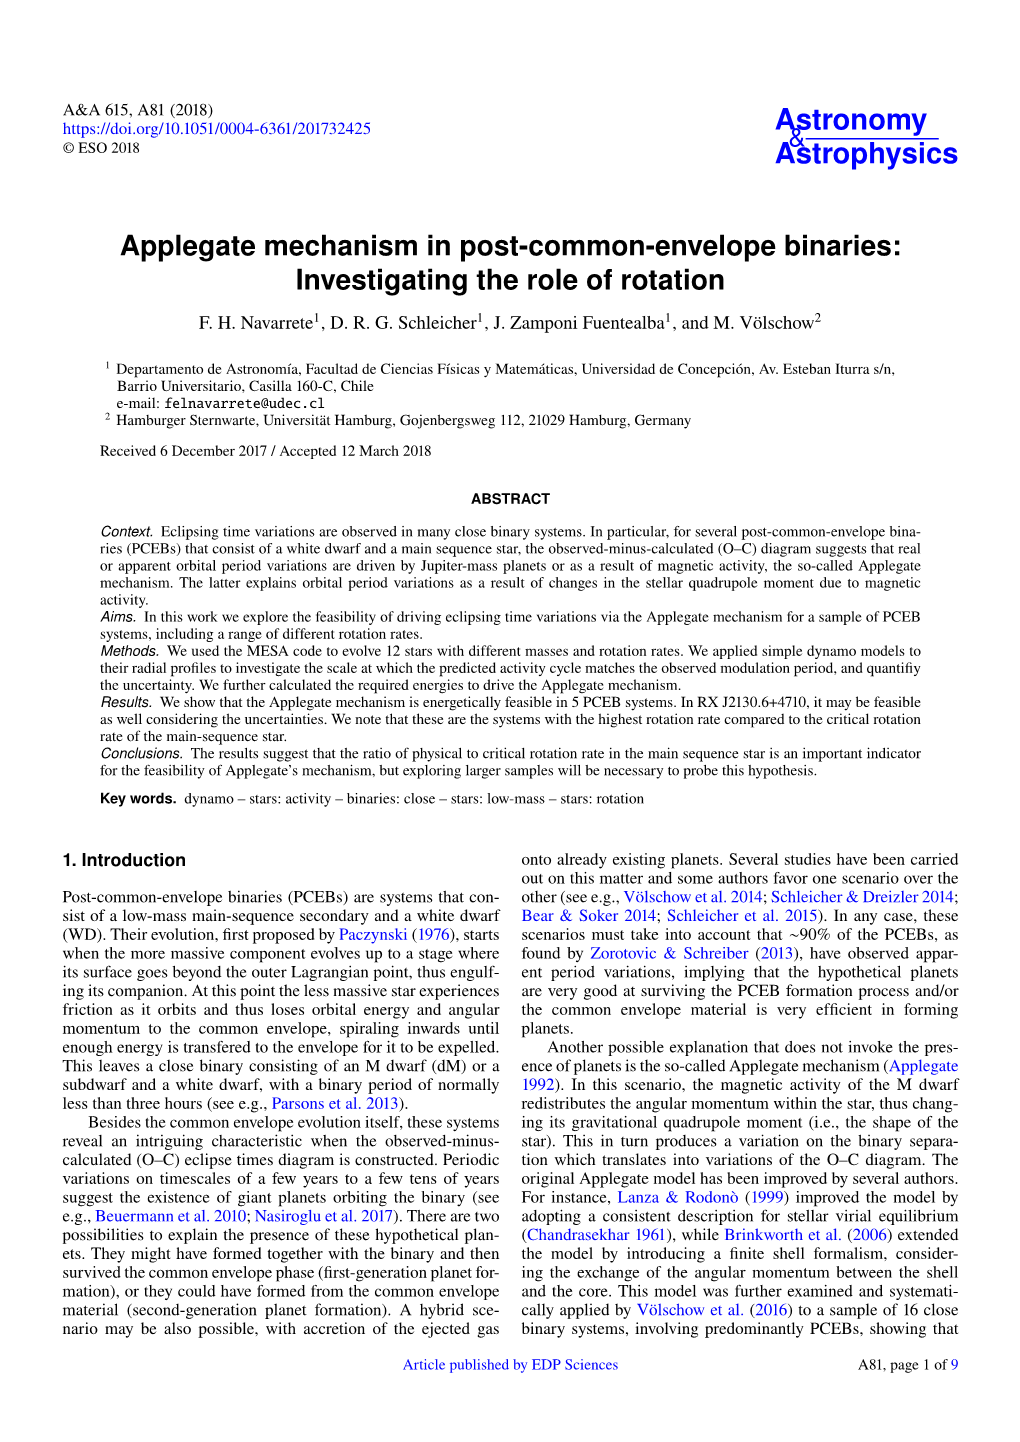 Applegate Mechanism in Post-Common-Envelope Binaries: Investigating the Role of Rotation F